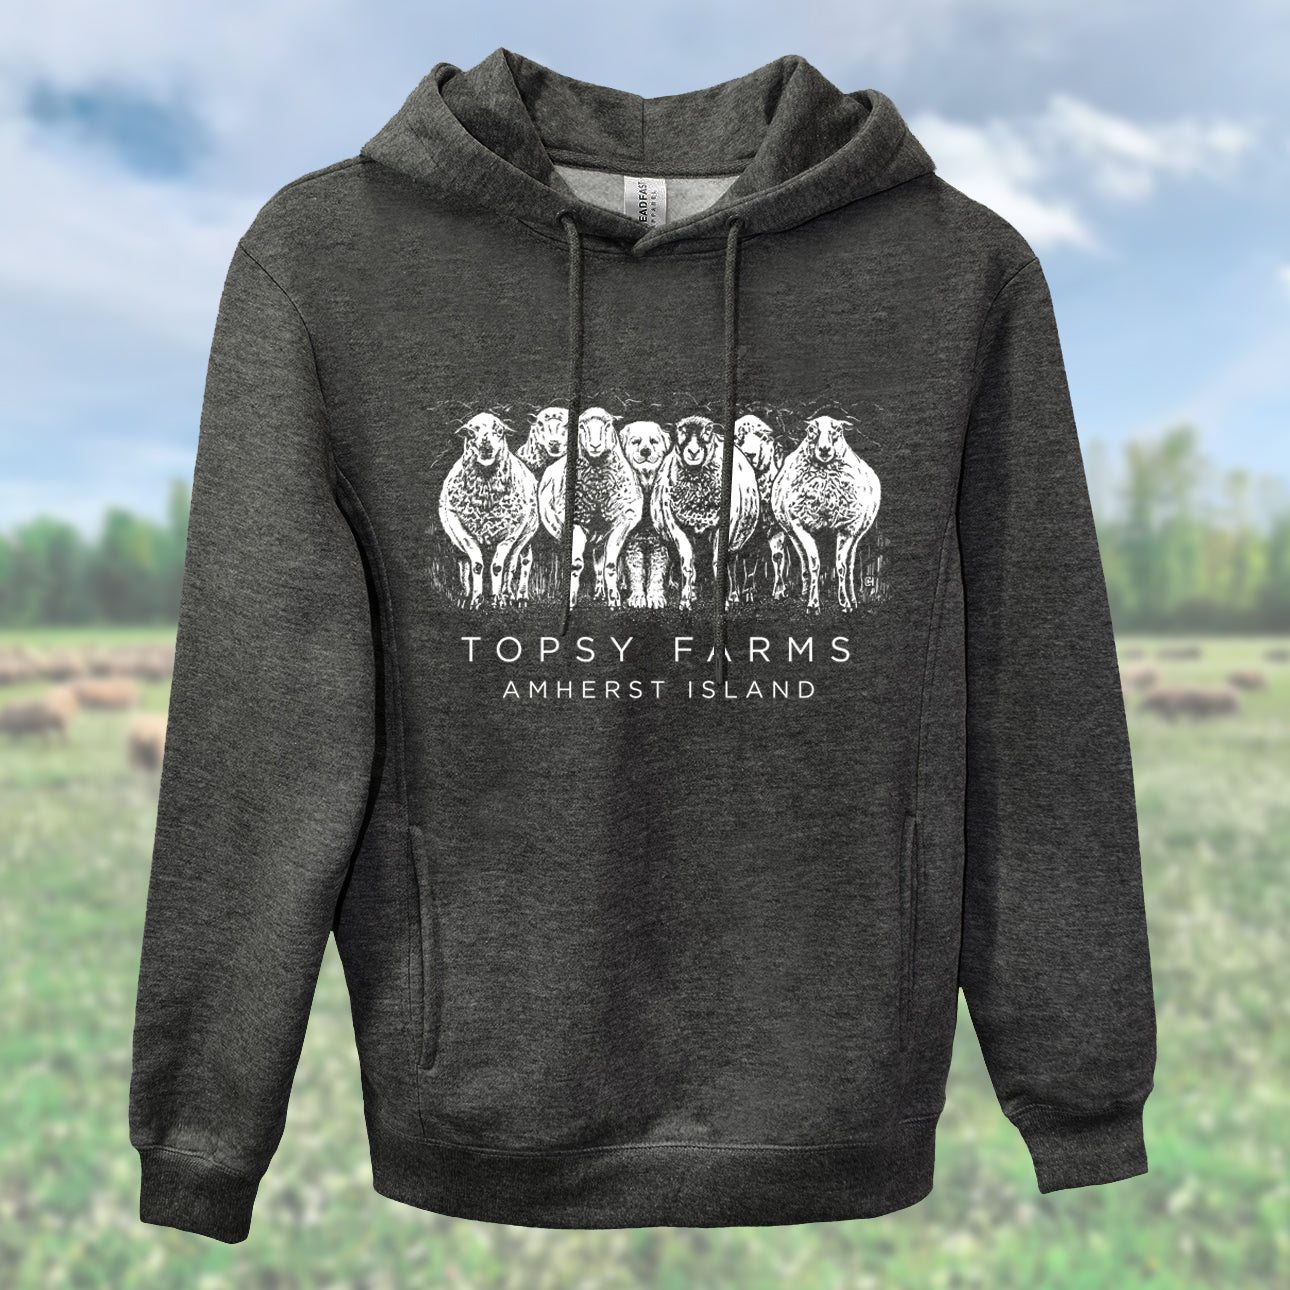 Topsy Farms' sheep and dog hoodie in charcoal healther